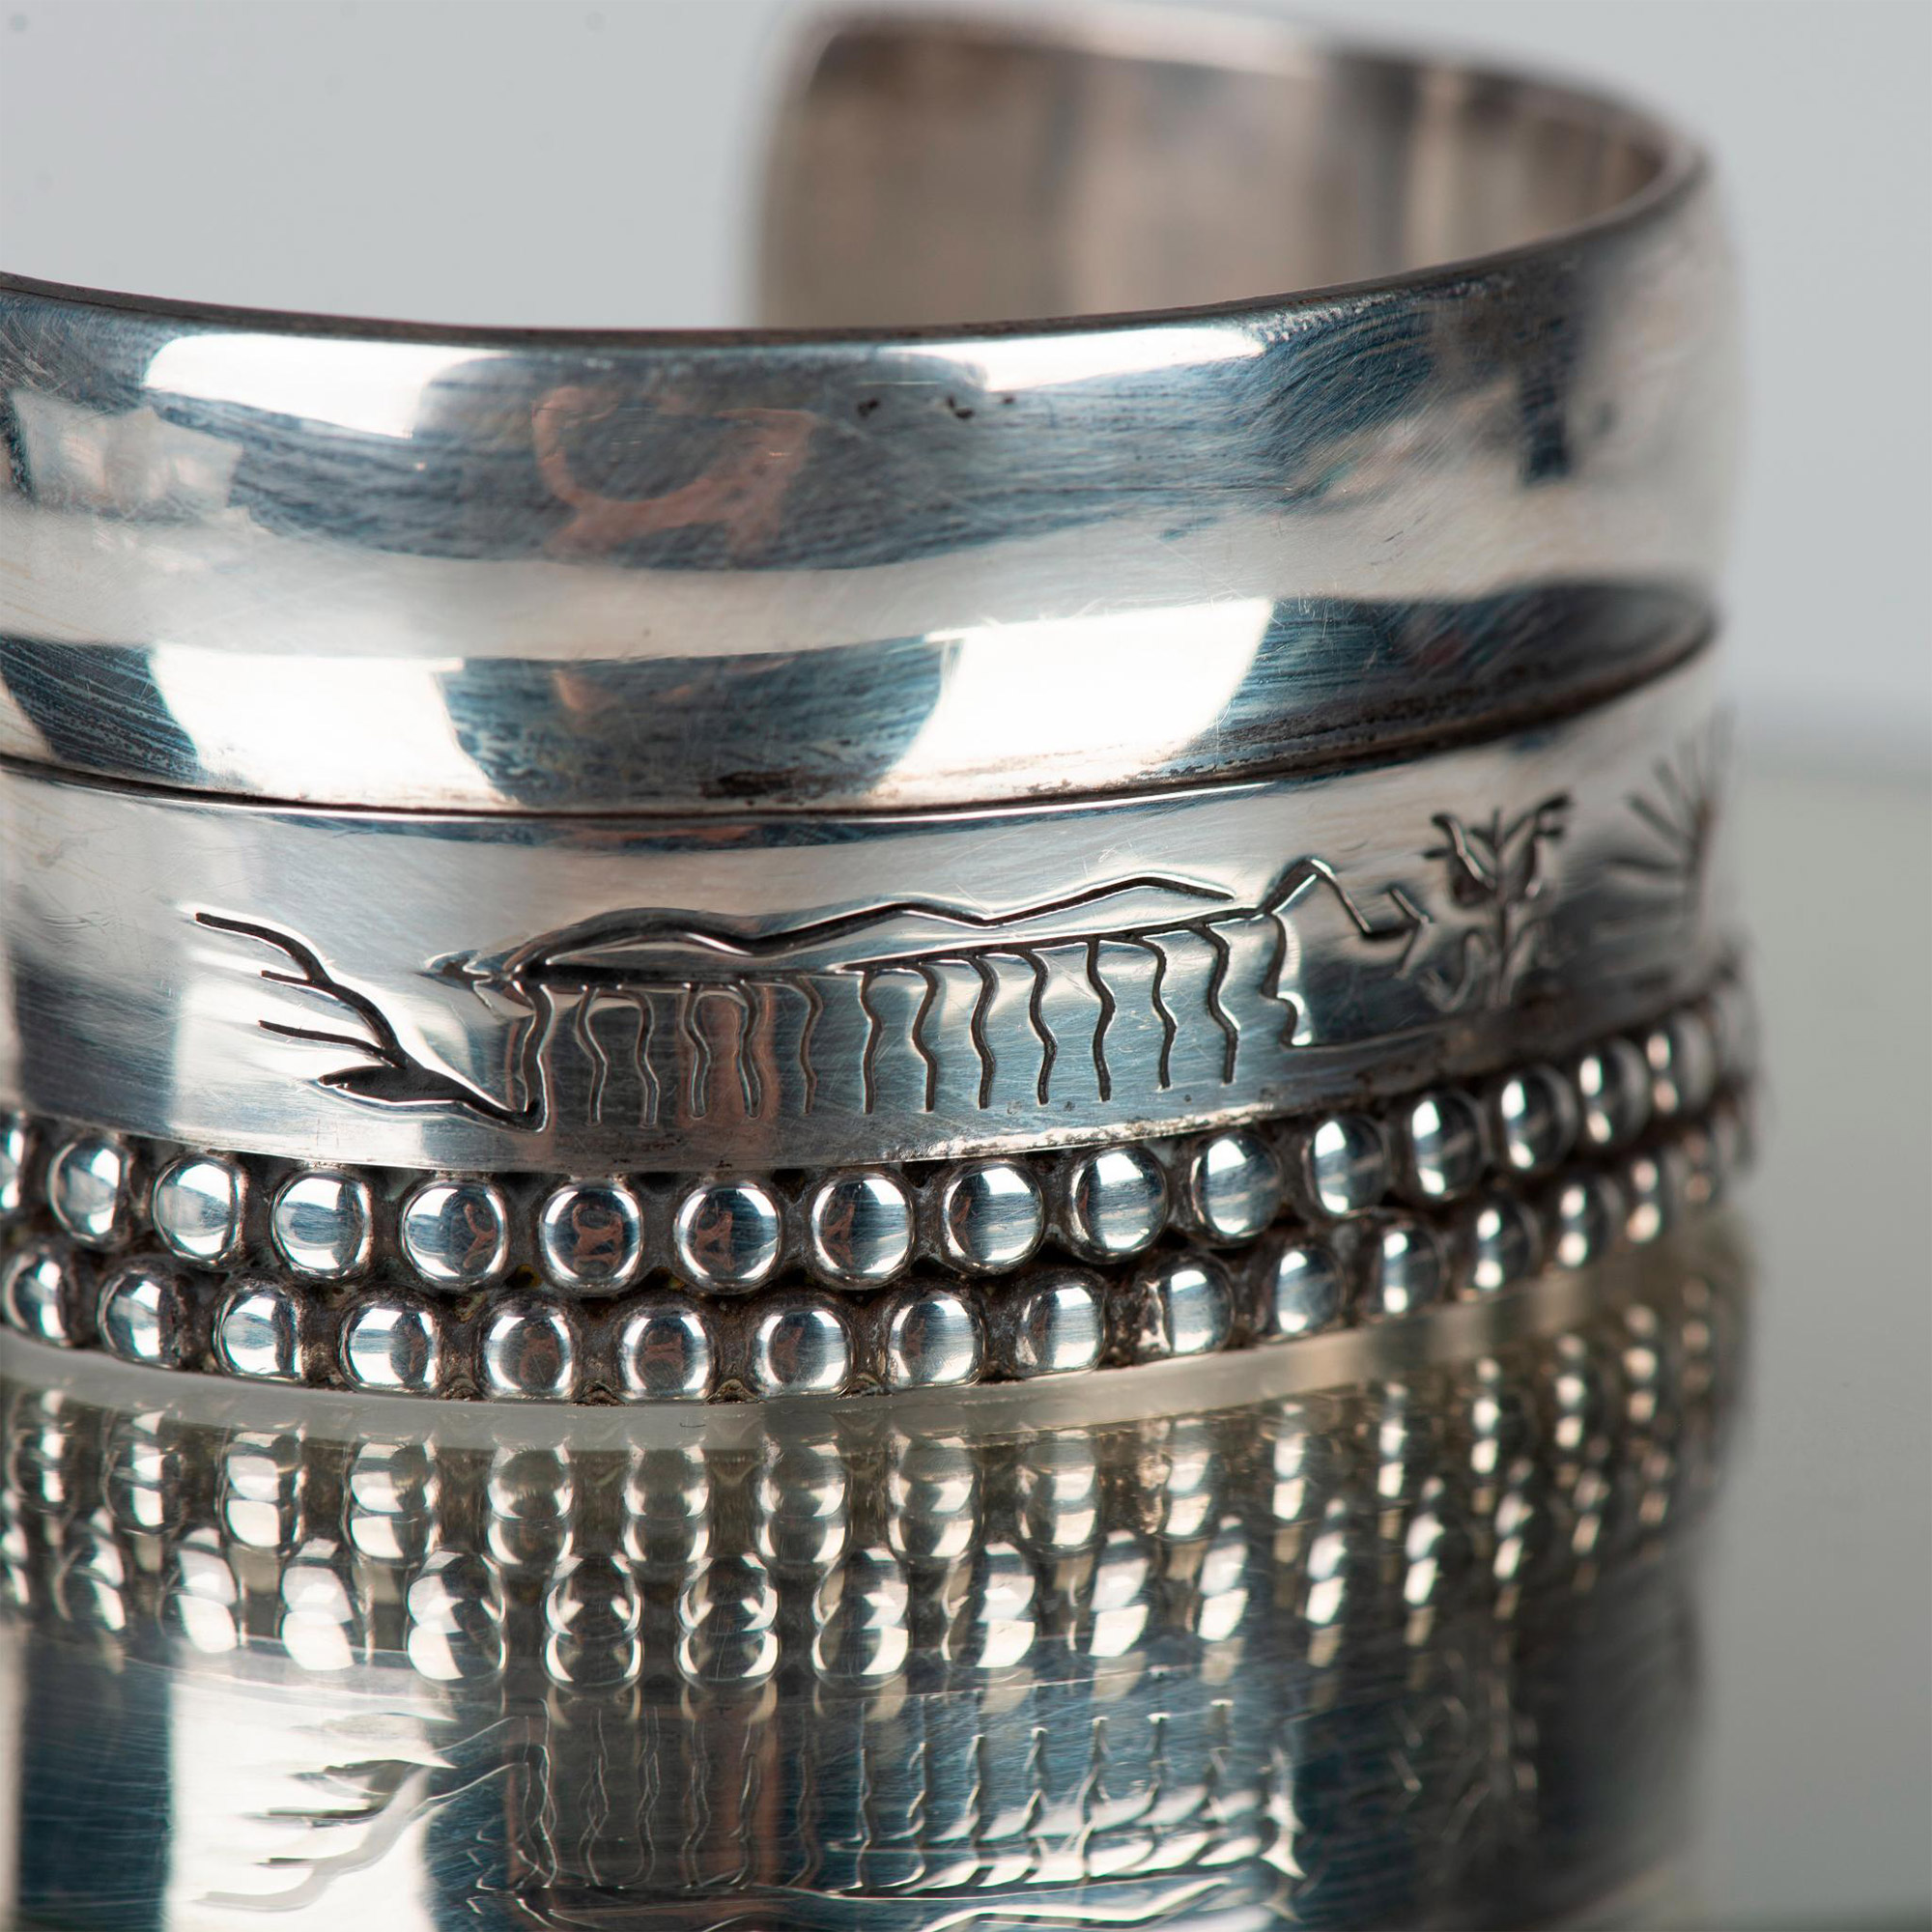 Larry PachecoKewa Heavy Southwestern Etched Sterling Silver Cuff Bracelet - Image 2 of 7